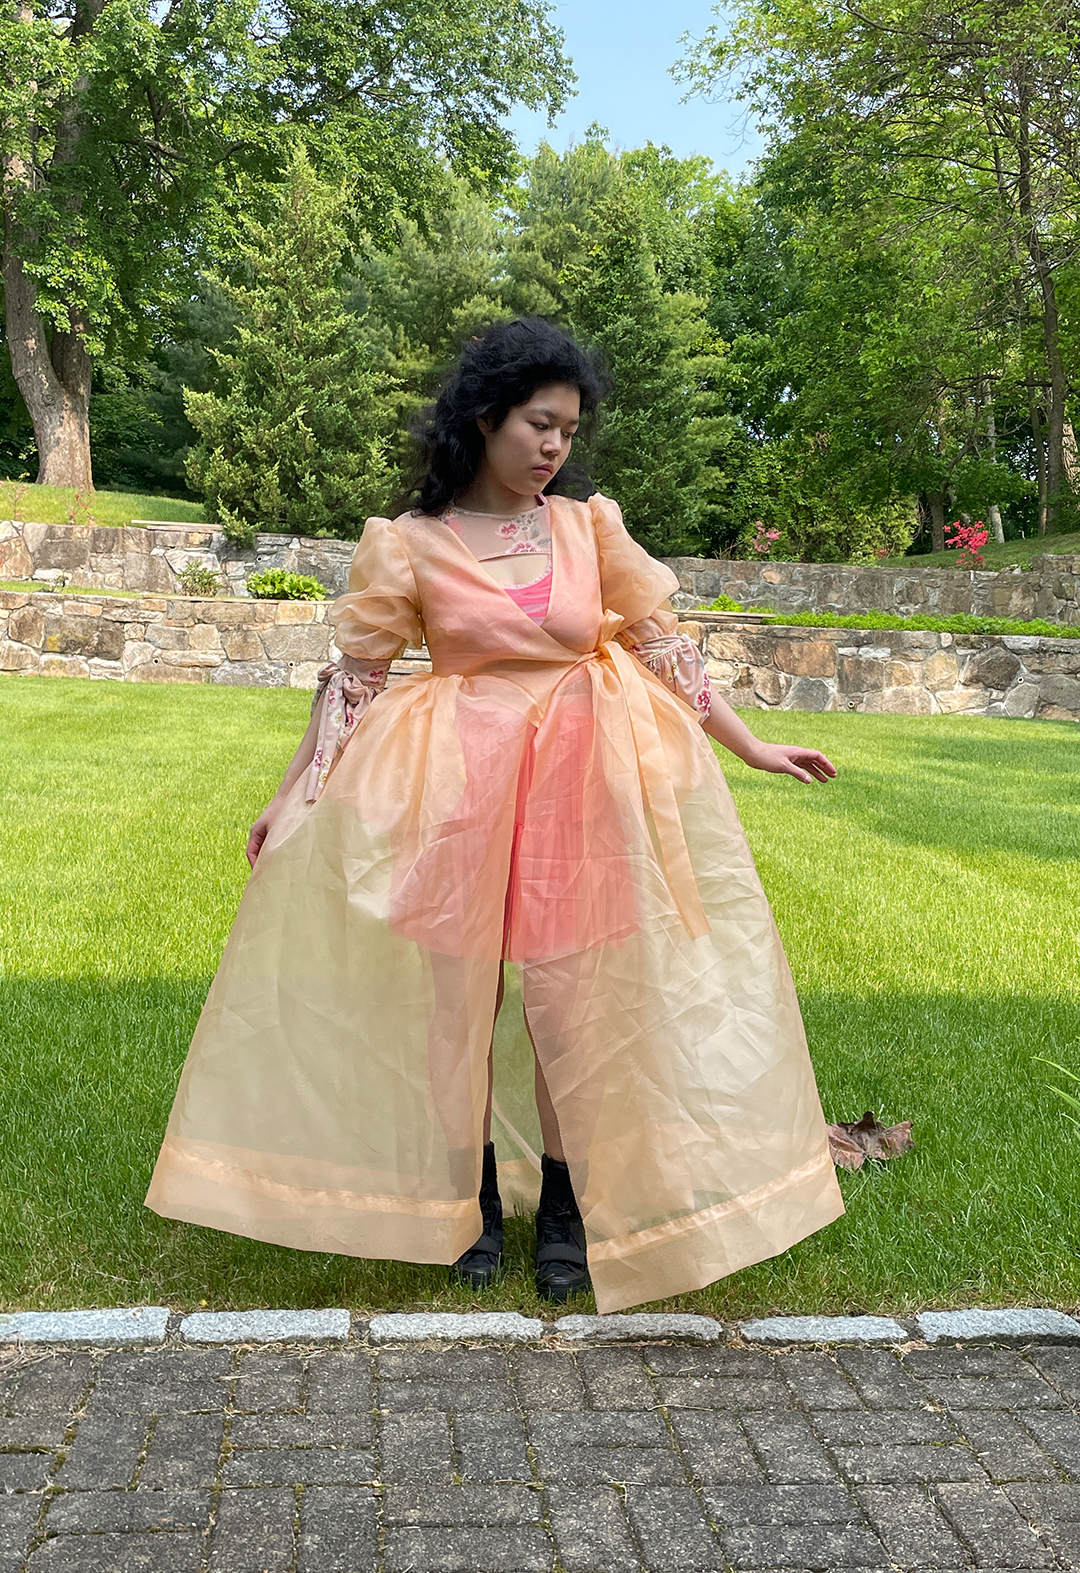 Front view of a model standing in a garden and wearing a translucent peach gown. The model is wearing a tiered skirt under the gown.